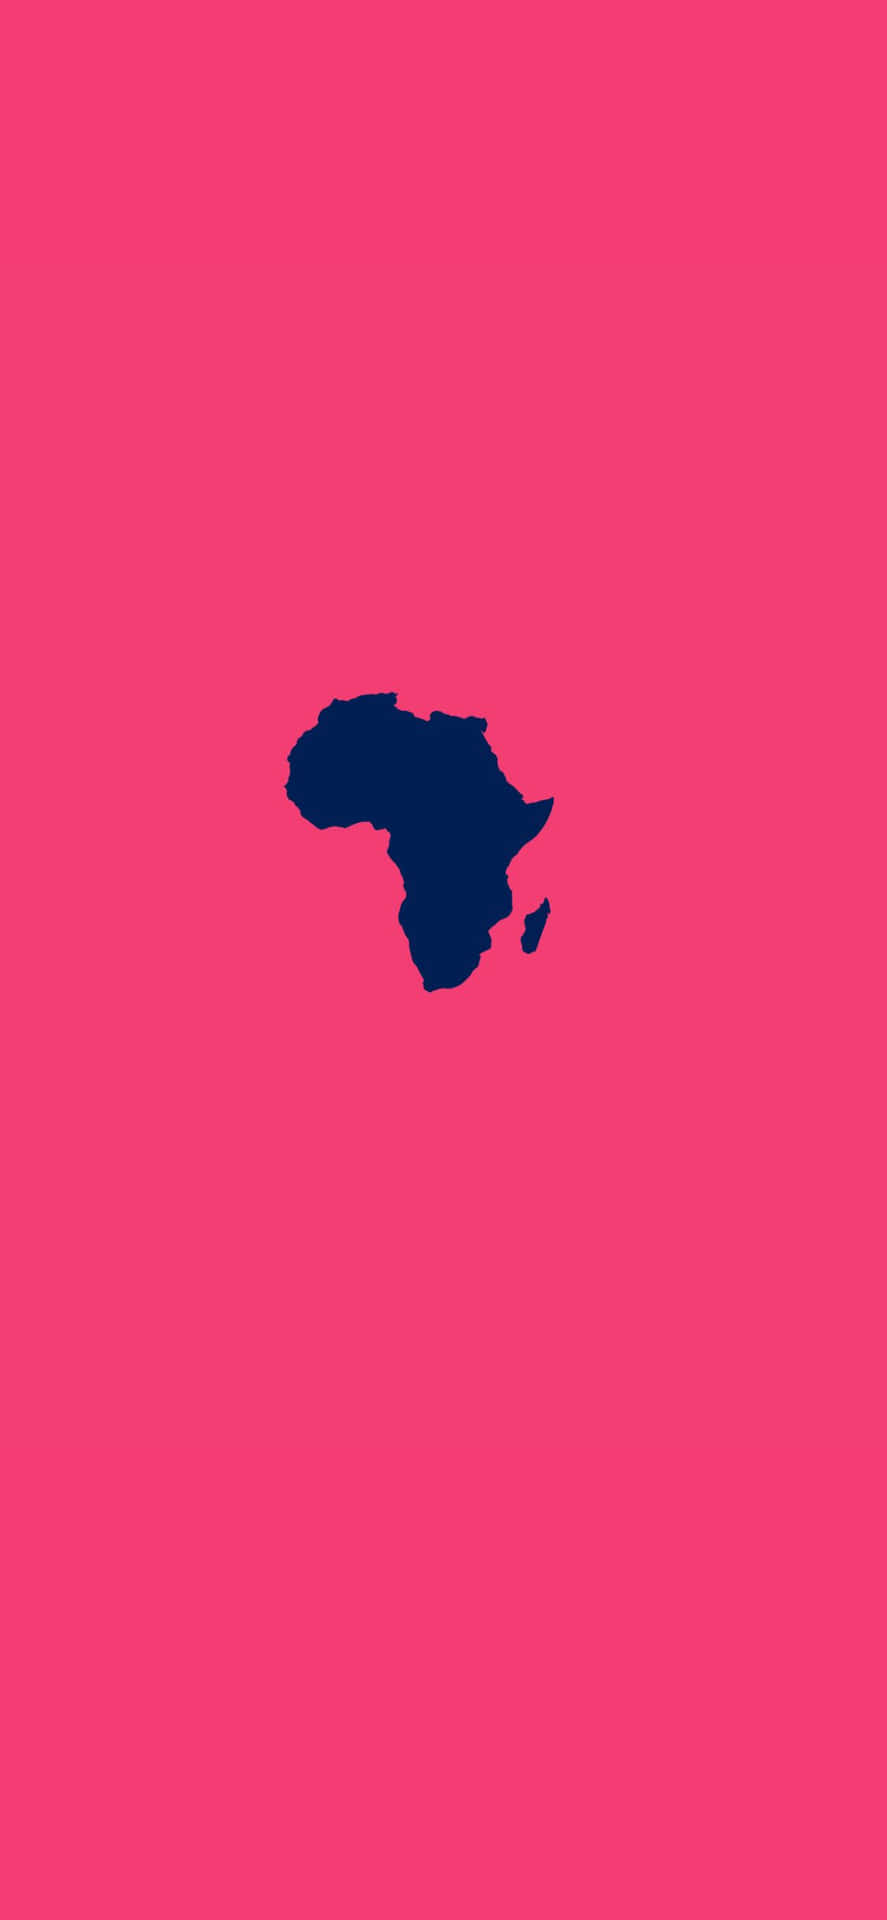 africa map on pink background